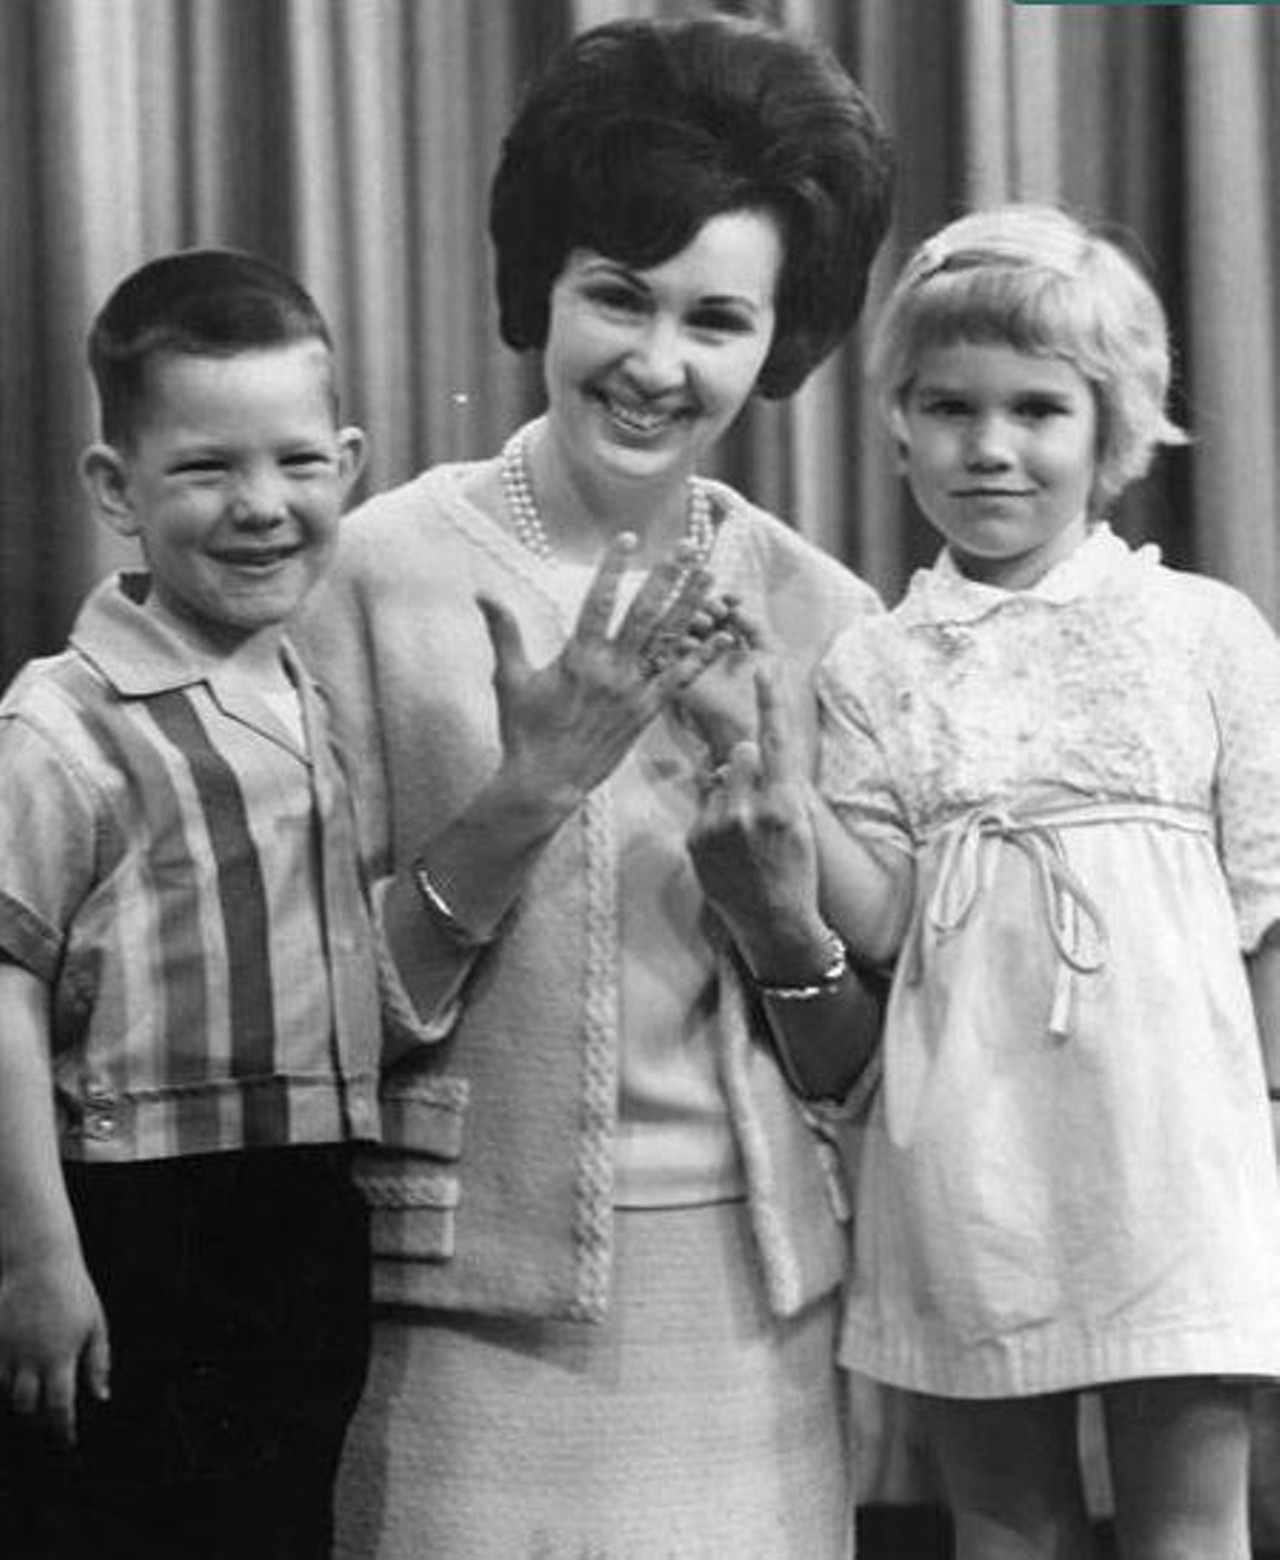 "Miss Barbara counts up her years as teacher on Romper Room on WEWS. She celebrates her sixth anniversary today. Helping her count are four-year-olds Jeff Hershman and Tammy Tilker who appear on the show this week (9:30 a.m., Channel 5) 4-28-66" -- photo caption.